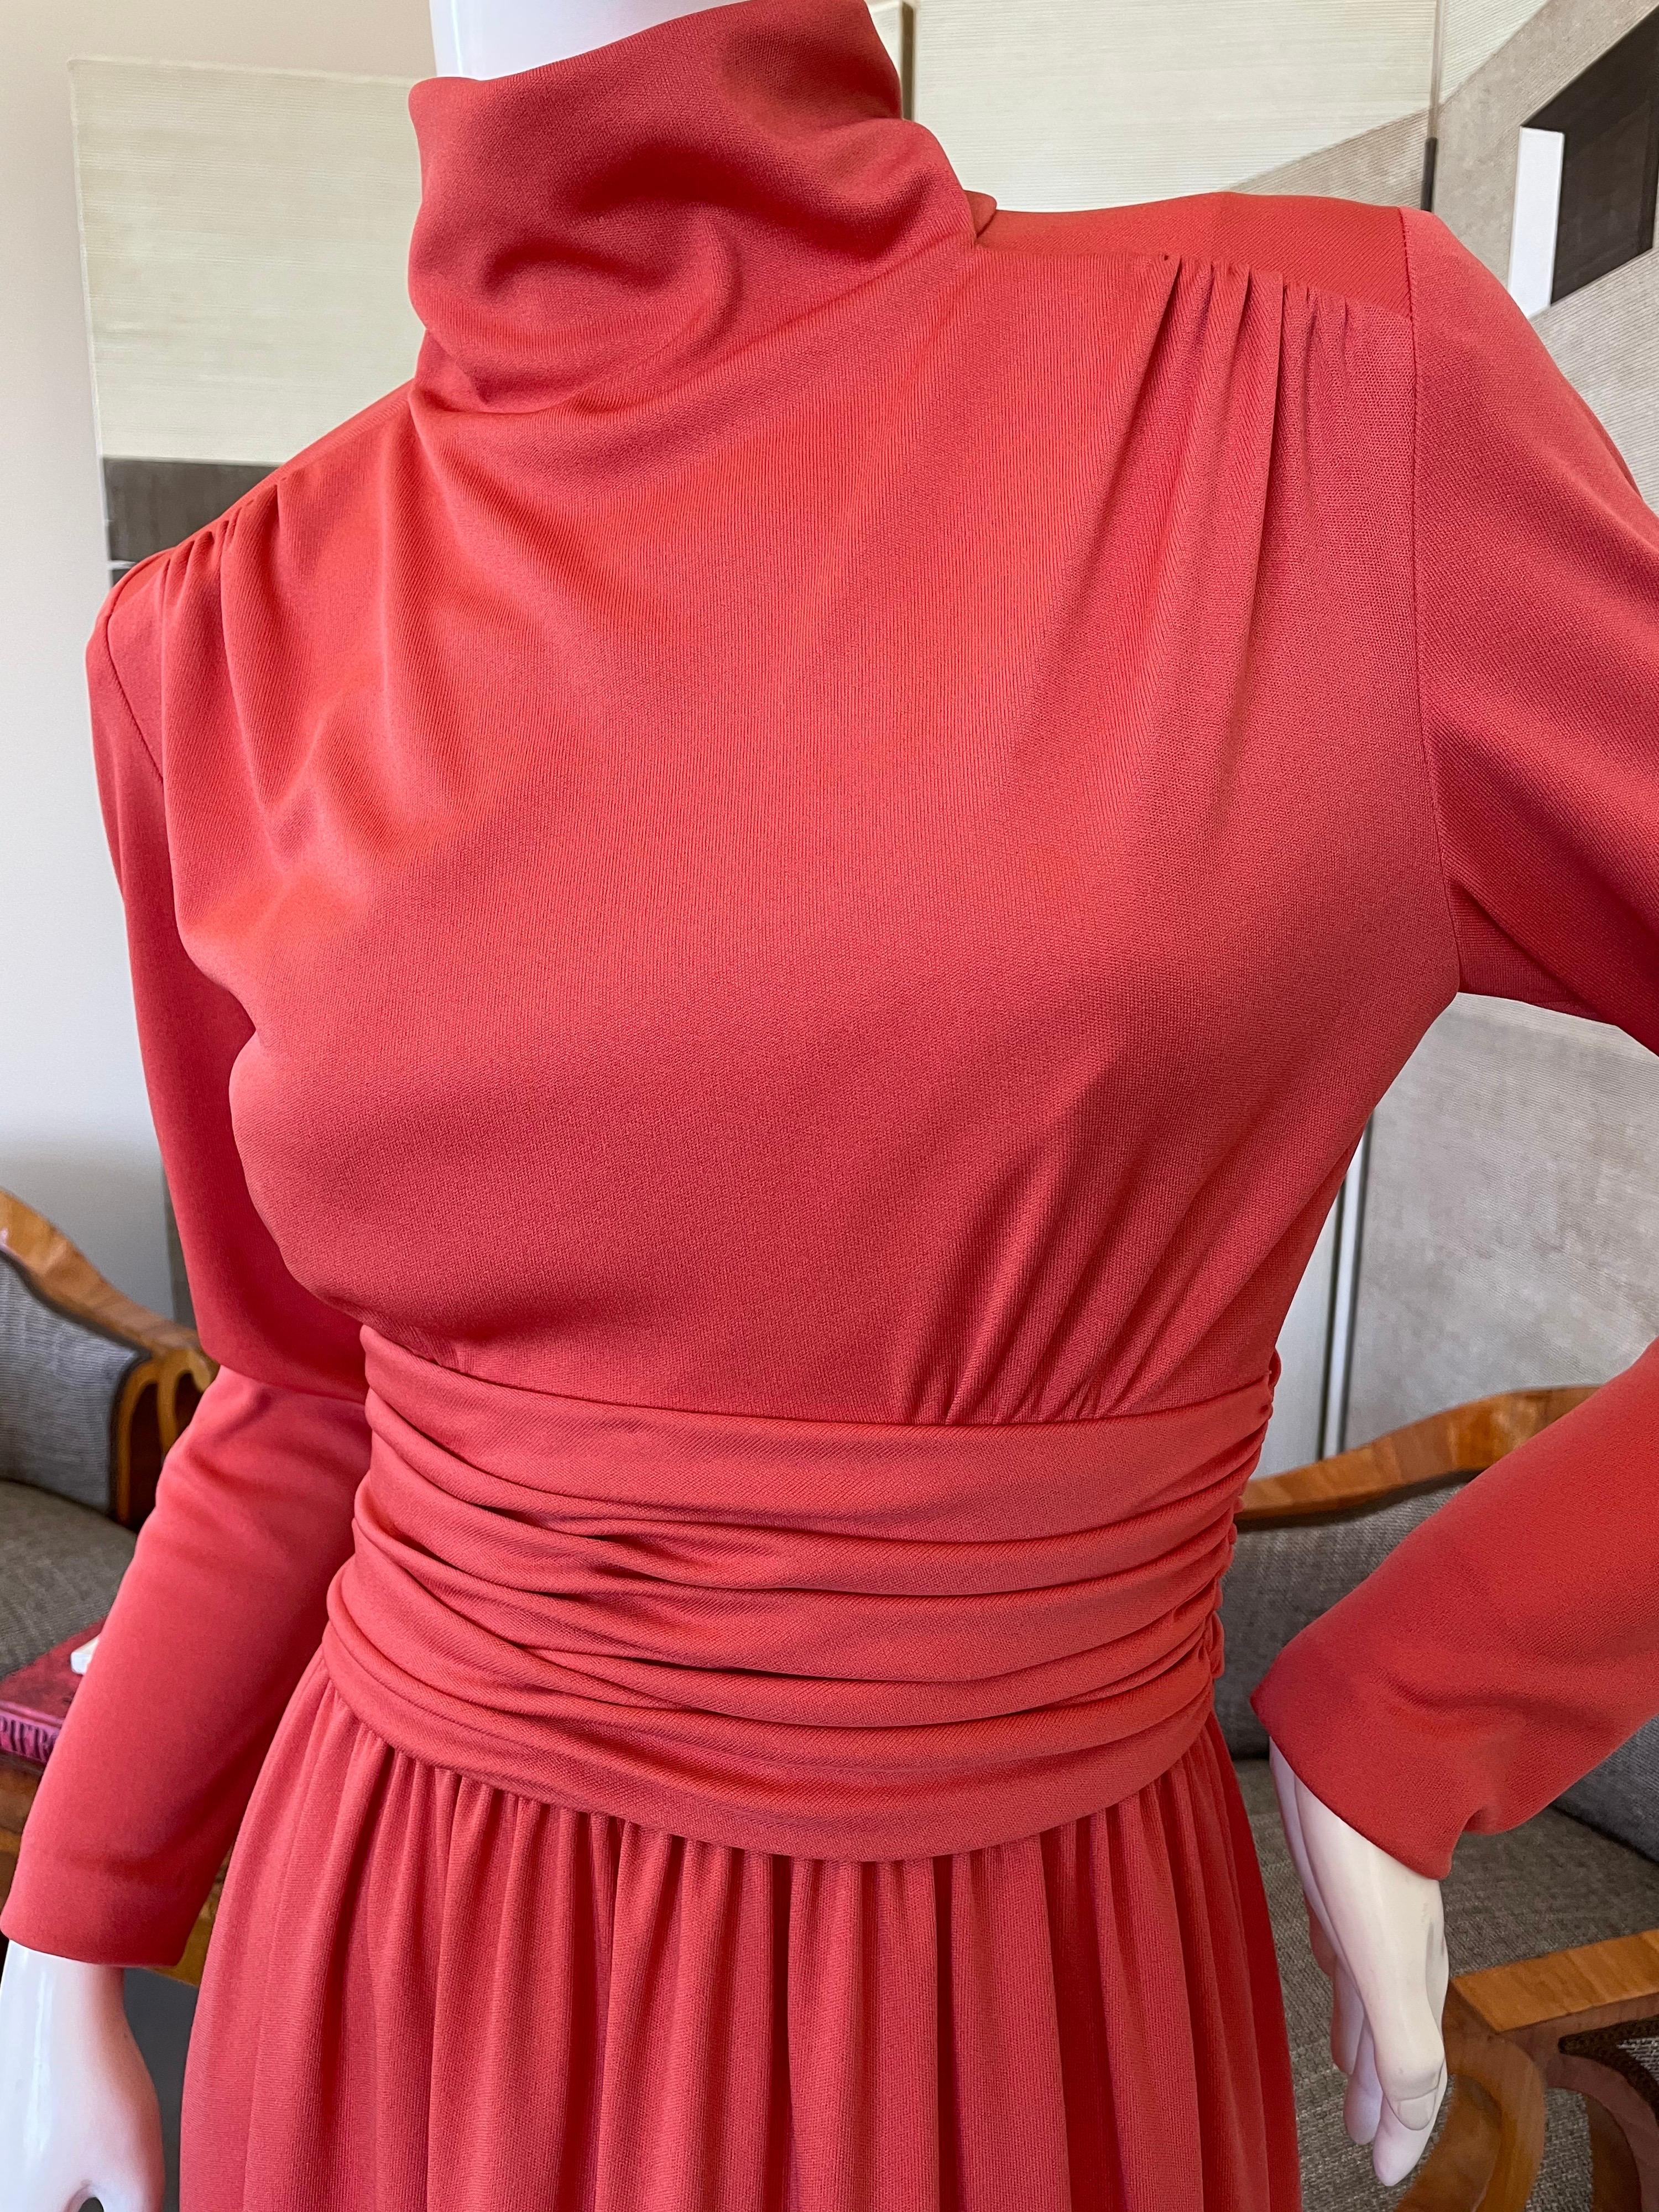 Women's Victor Costa for I. Magnin 1970's Coral Evening Dress with Wide Feather Hem For Sale